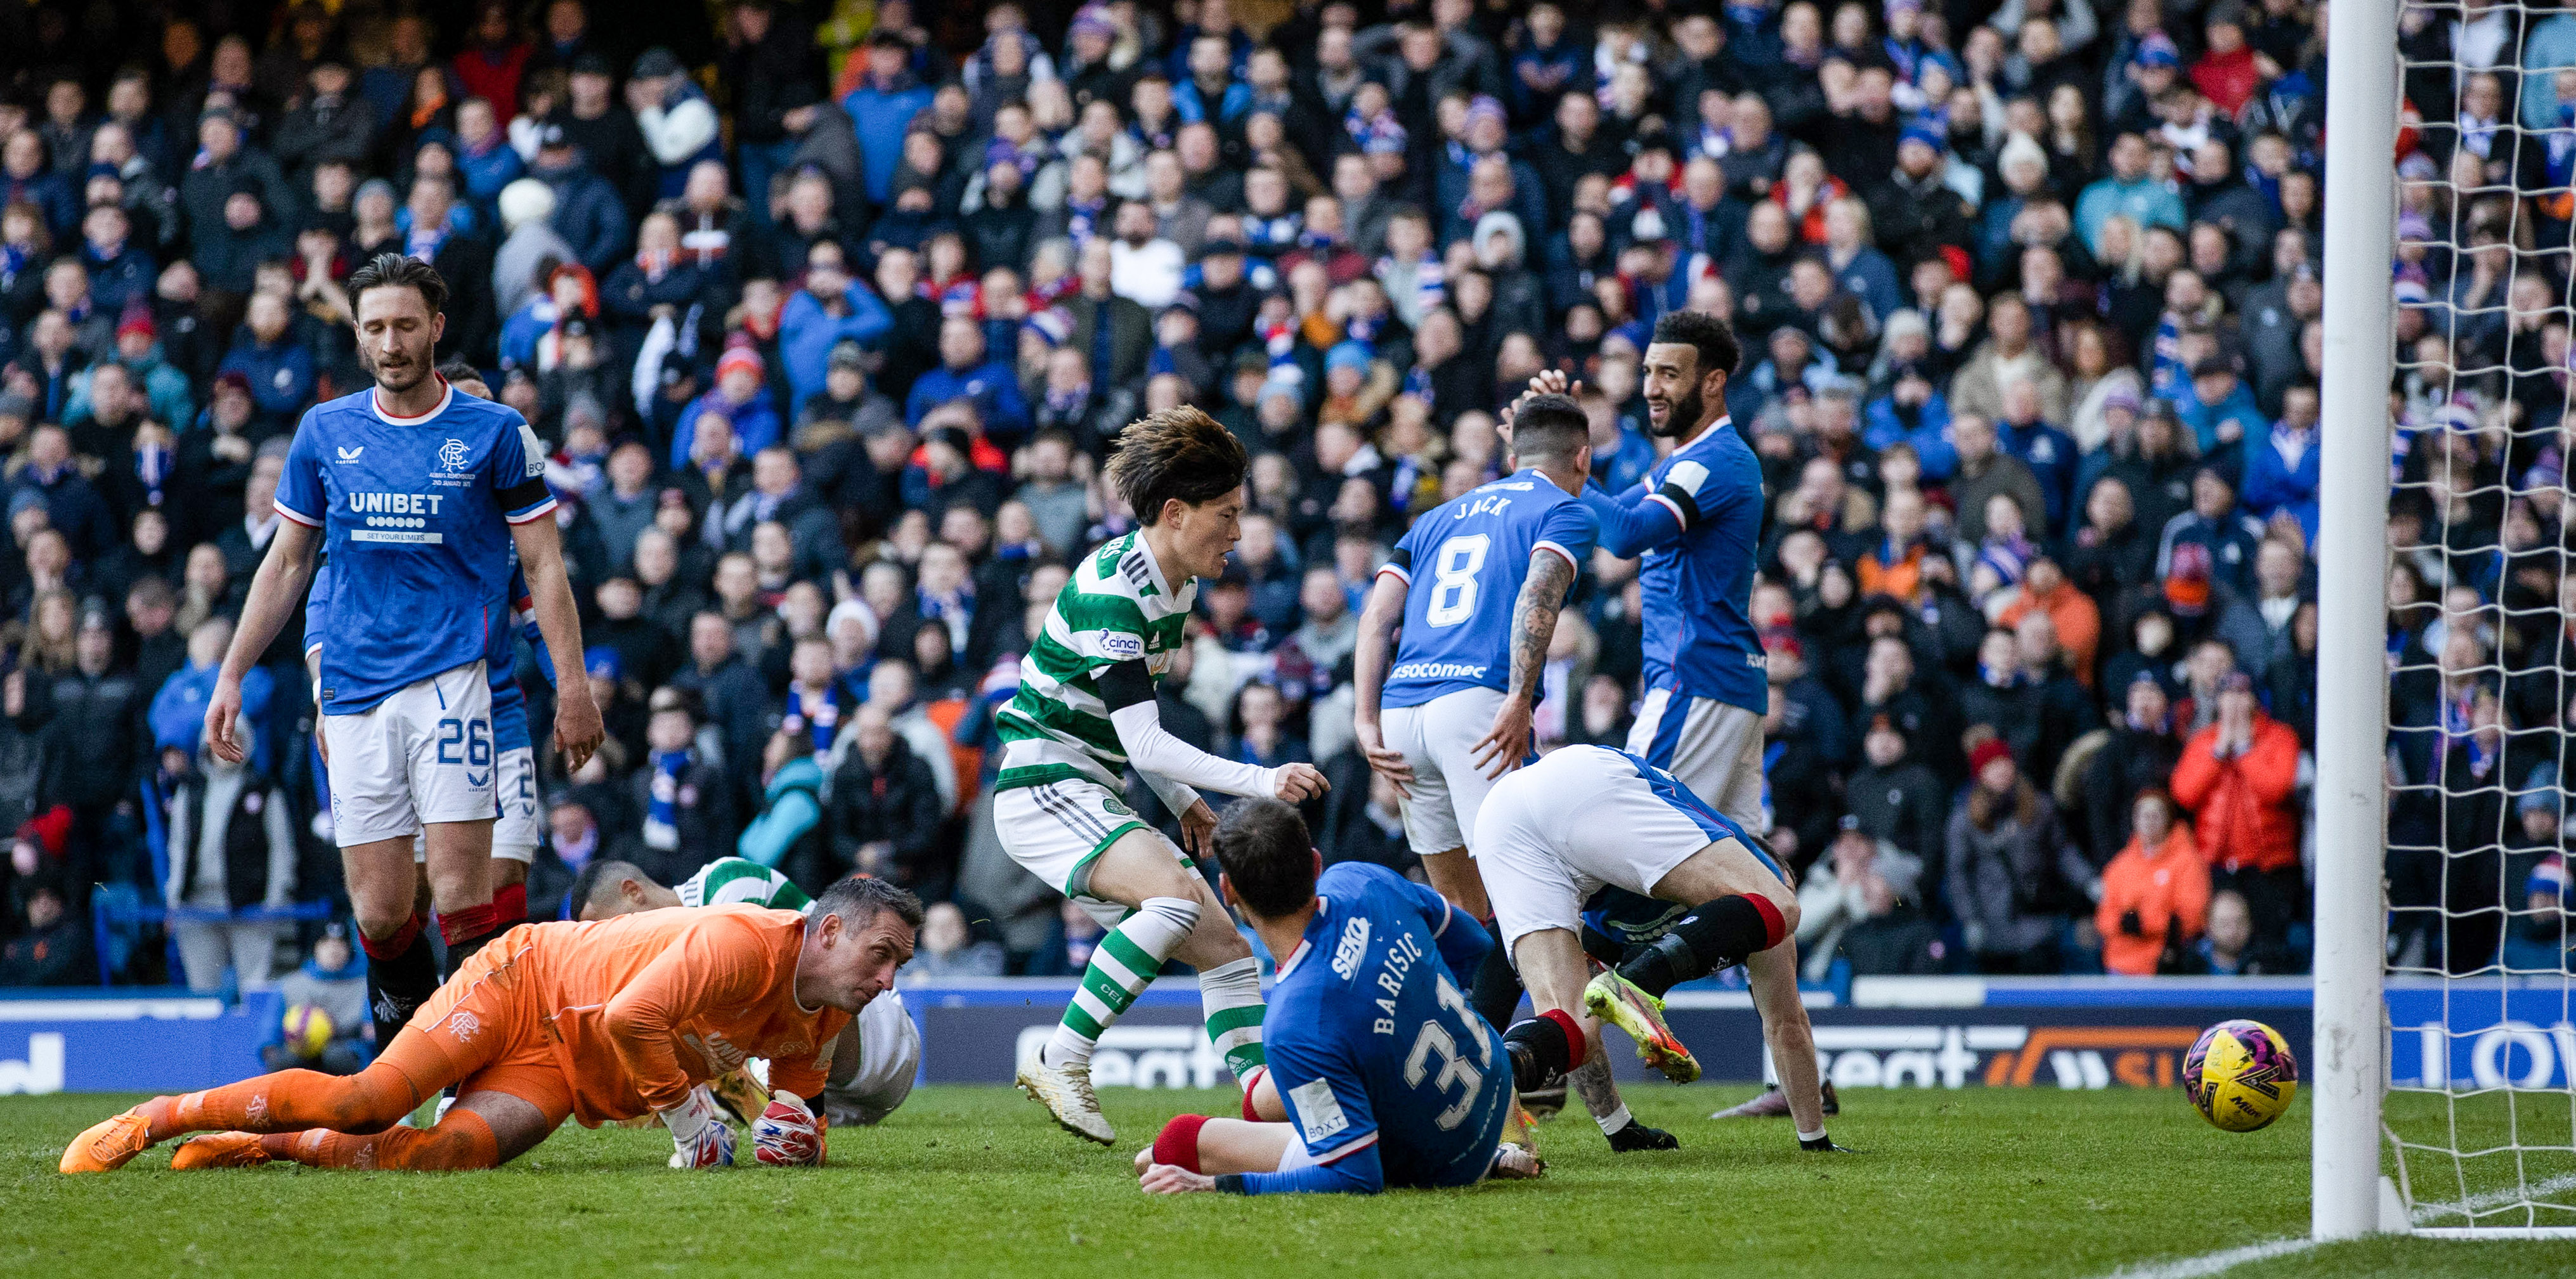 Celtic's Kyogo Furuhashi runs to collect the ball after scoring a late equaliser to make it 2-2 during a cinch Premiership match between Rangers and Celtic at Ibrox Stadium, on January 2, 2023.